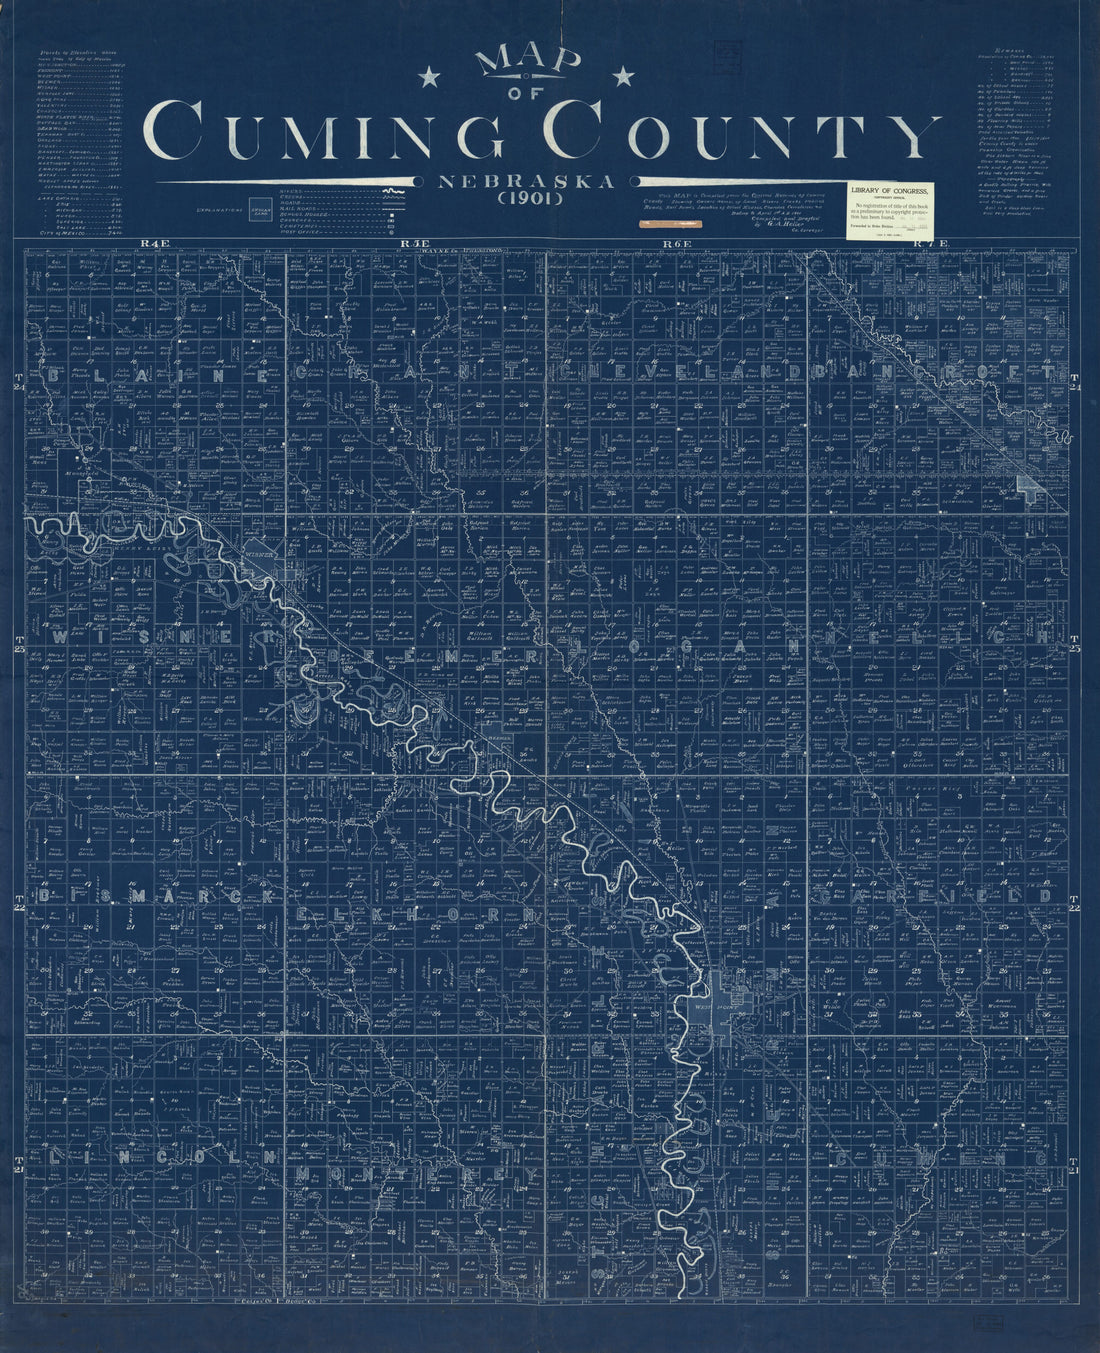 This old map of Map of Cuming County, Nebraska from 1901 was created by G. A. Heller in 1901